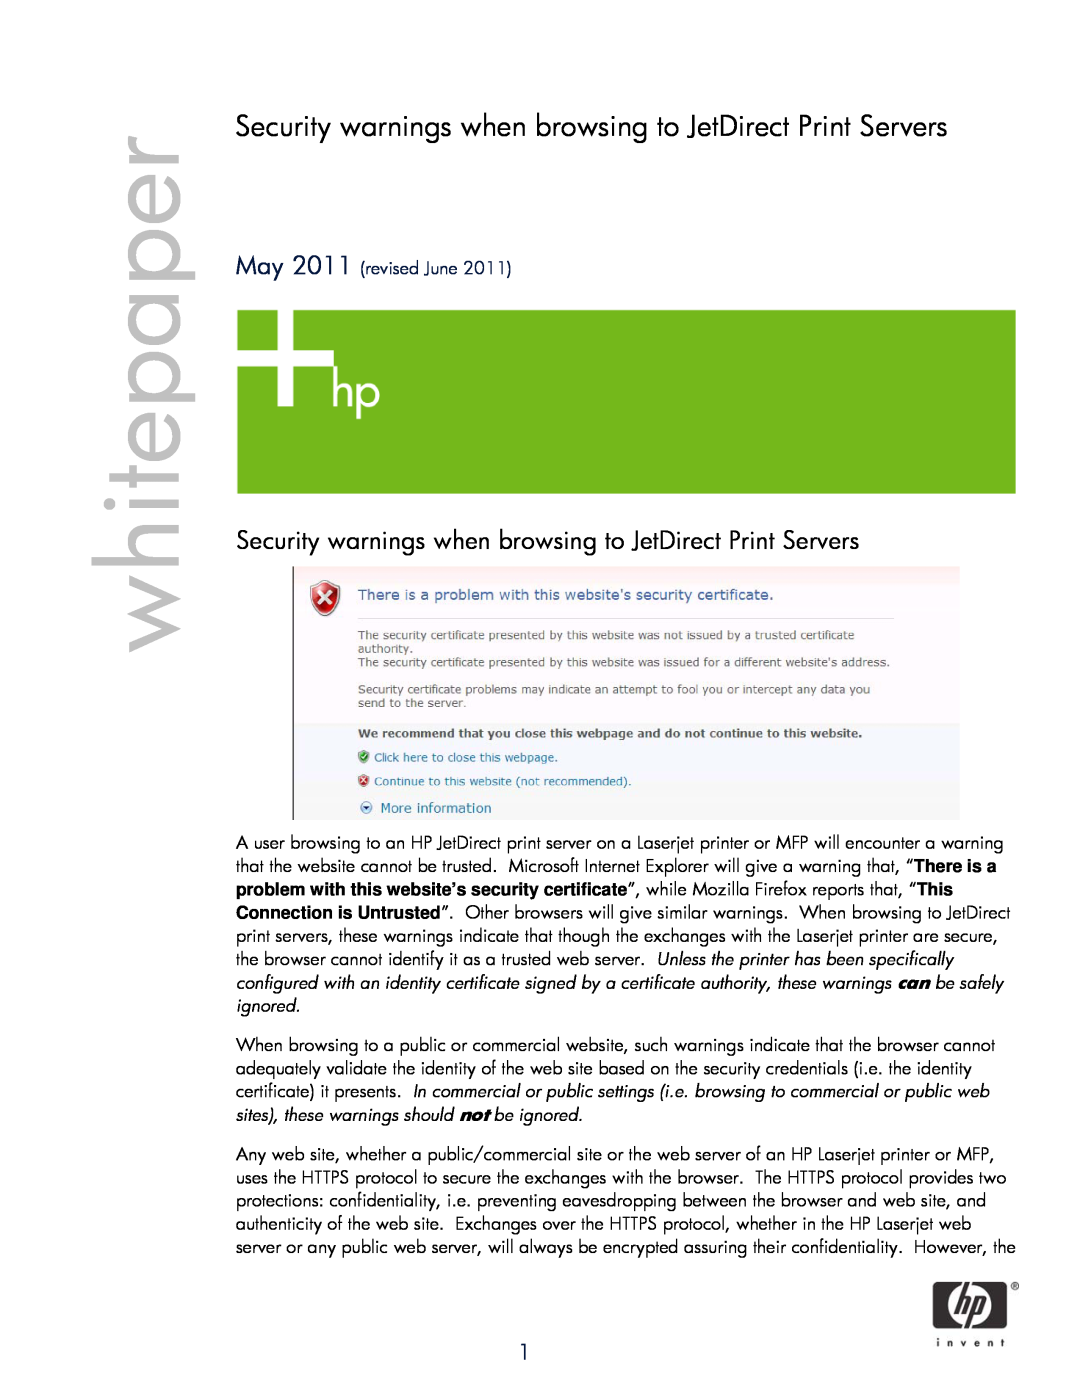 HP Pro MFP M177fw manual Security warnings when browsing to JetDirect Print Servers, whitepaper, May 2011 revised June 